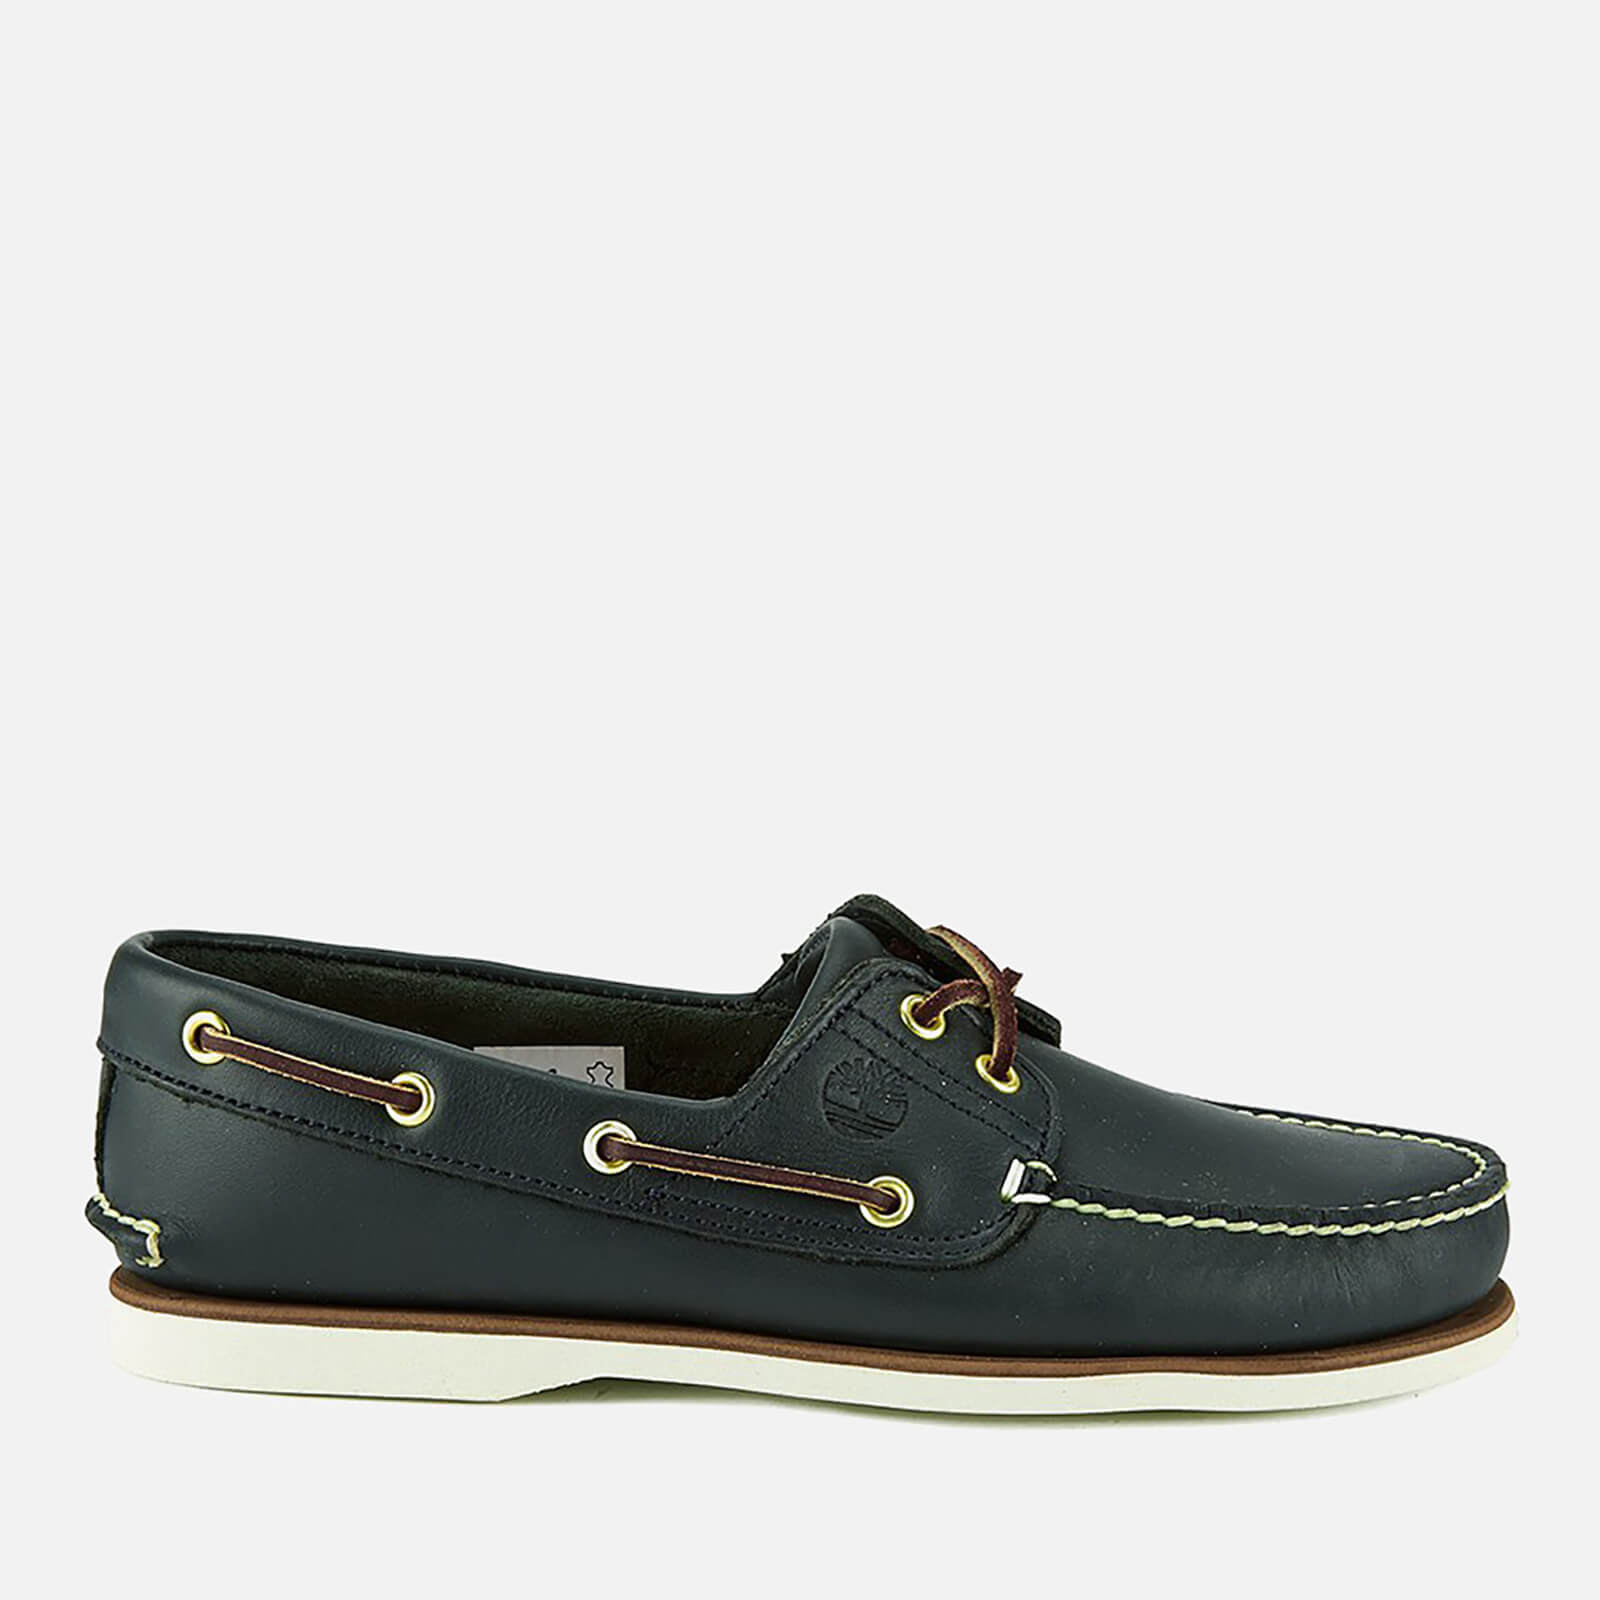 Timberland Men’s Classic 2-Eye Boat Shoes - Navy